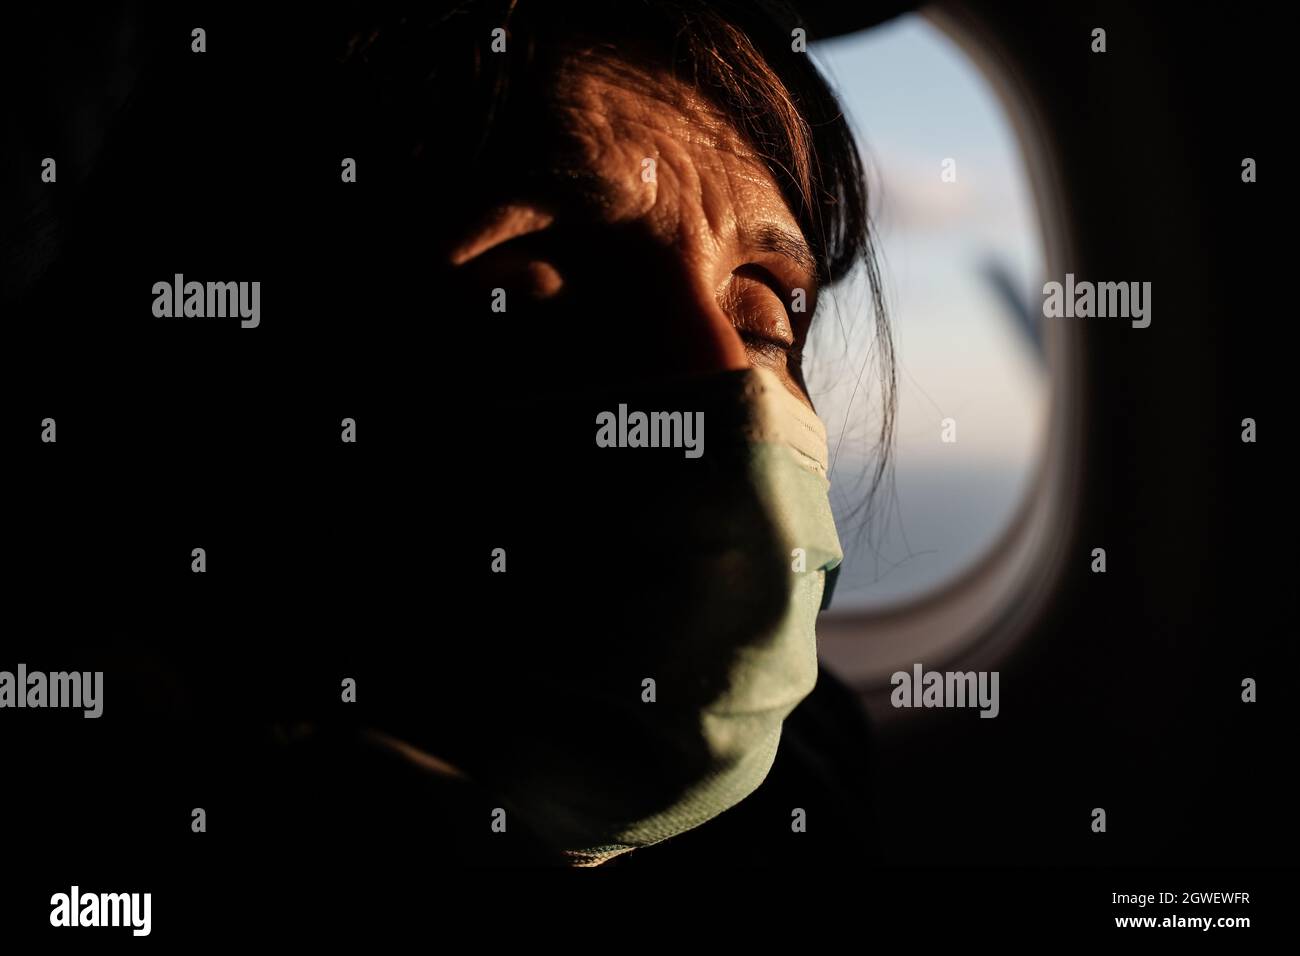 Pittsburgh, Pennsylvania, USA. 1st October, 2021. A woman relaxes with her eyes closed aboard a Delta Airlines flight from Pittsburgh to N.Y.. Credit: Nir Alon/Alamy Live News. Stock Photo